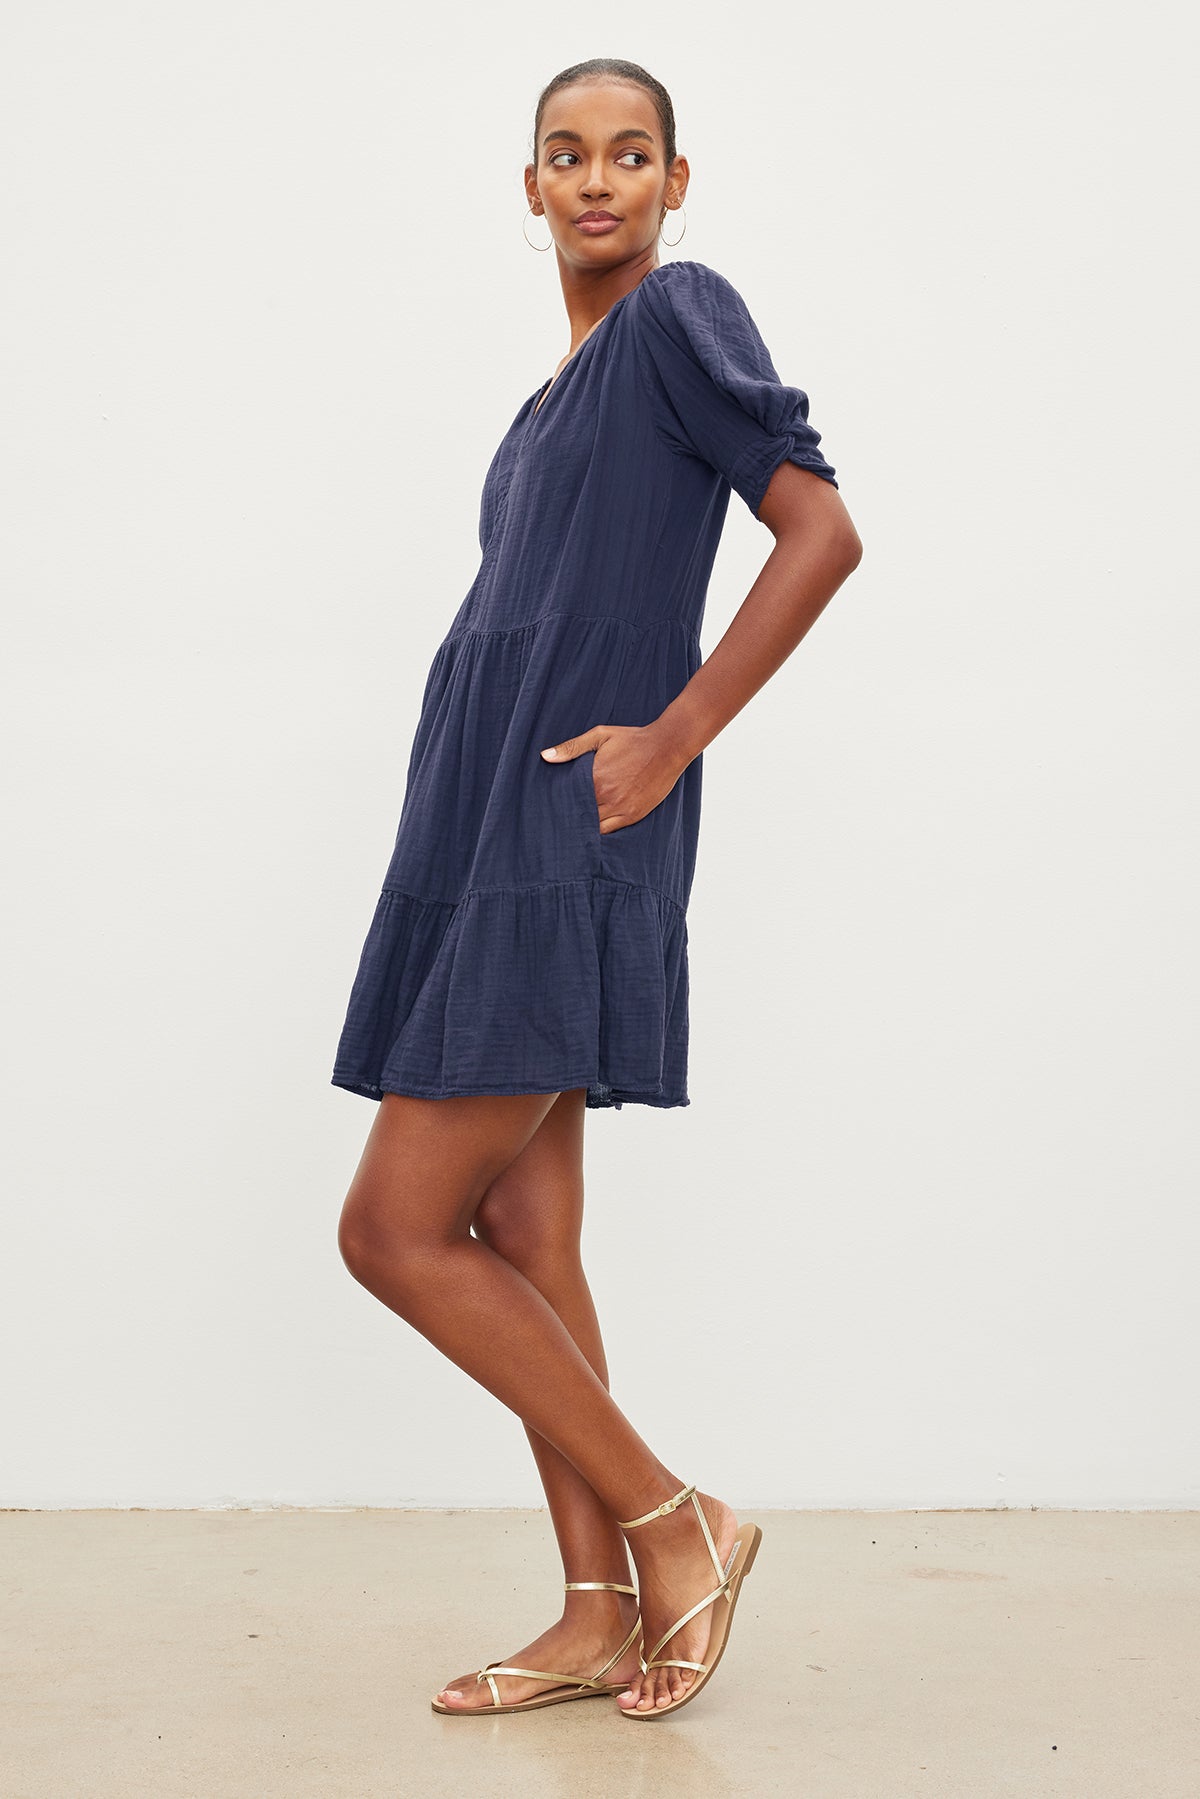   A person stands sideways against a plain background, wearing a navy blue BELLA COTTON GAUZE DRESS by Velvet by Graham & Spencer and gold sandals. 